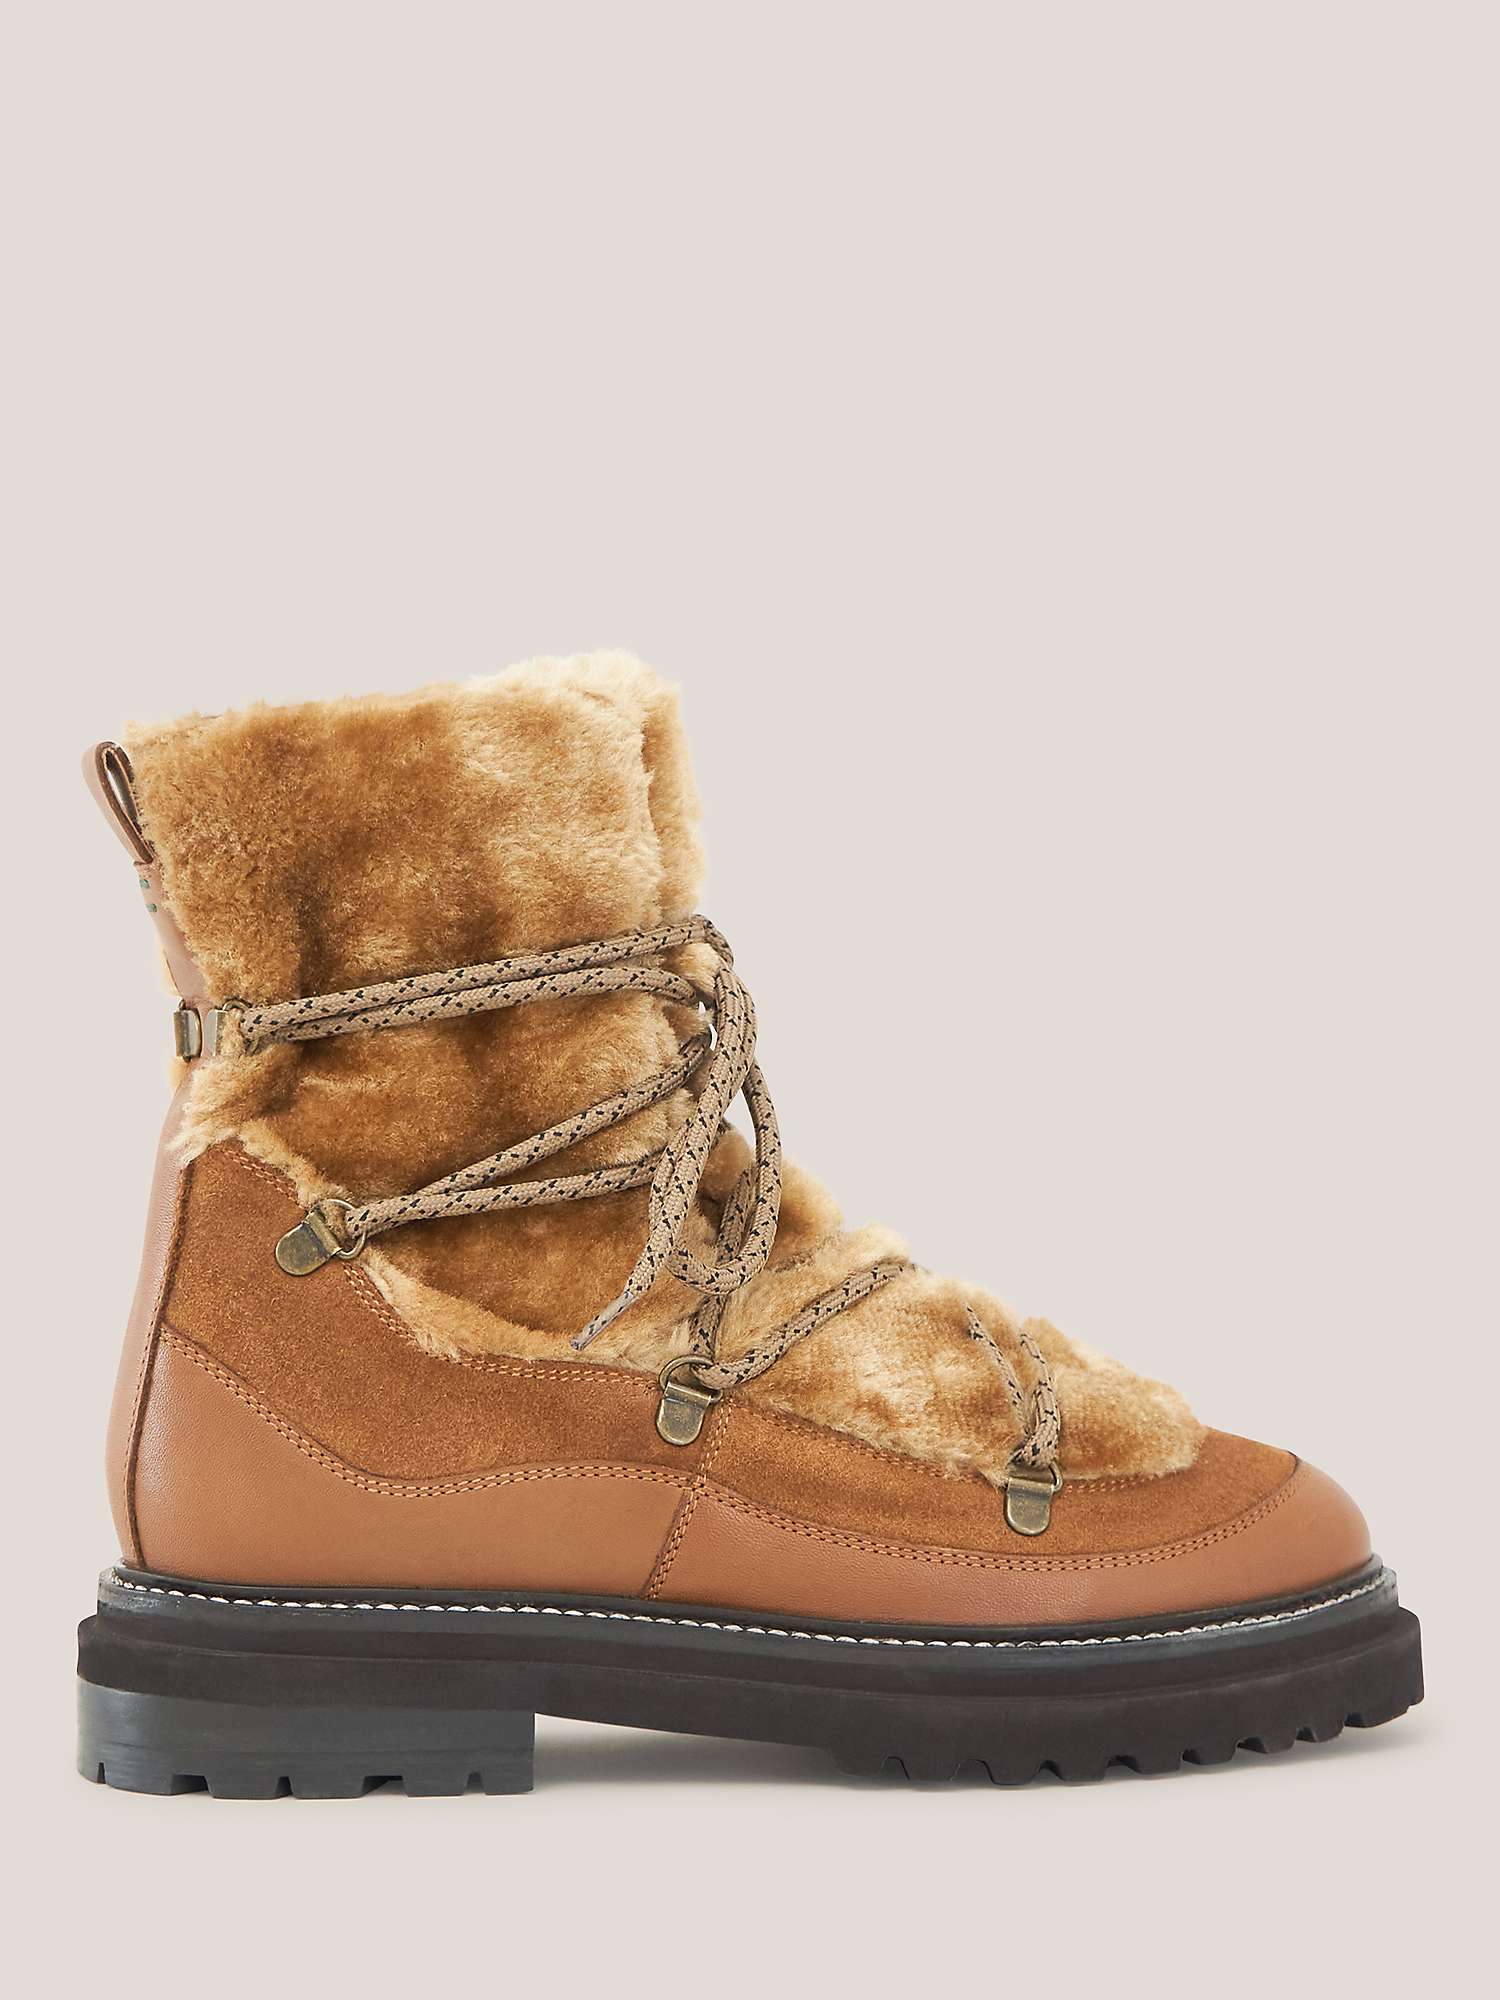 Buy White Stuff Hailey Lace Up Hiker Boots Online at johnlewis.com